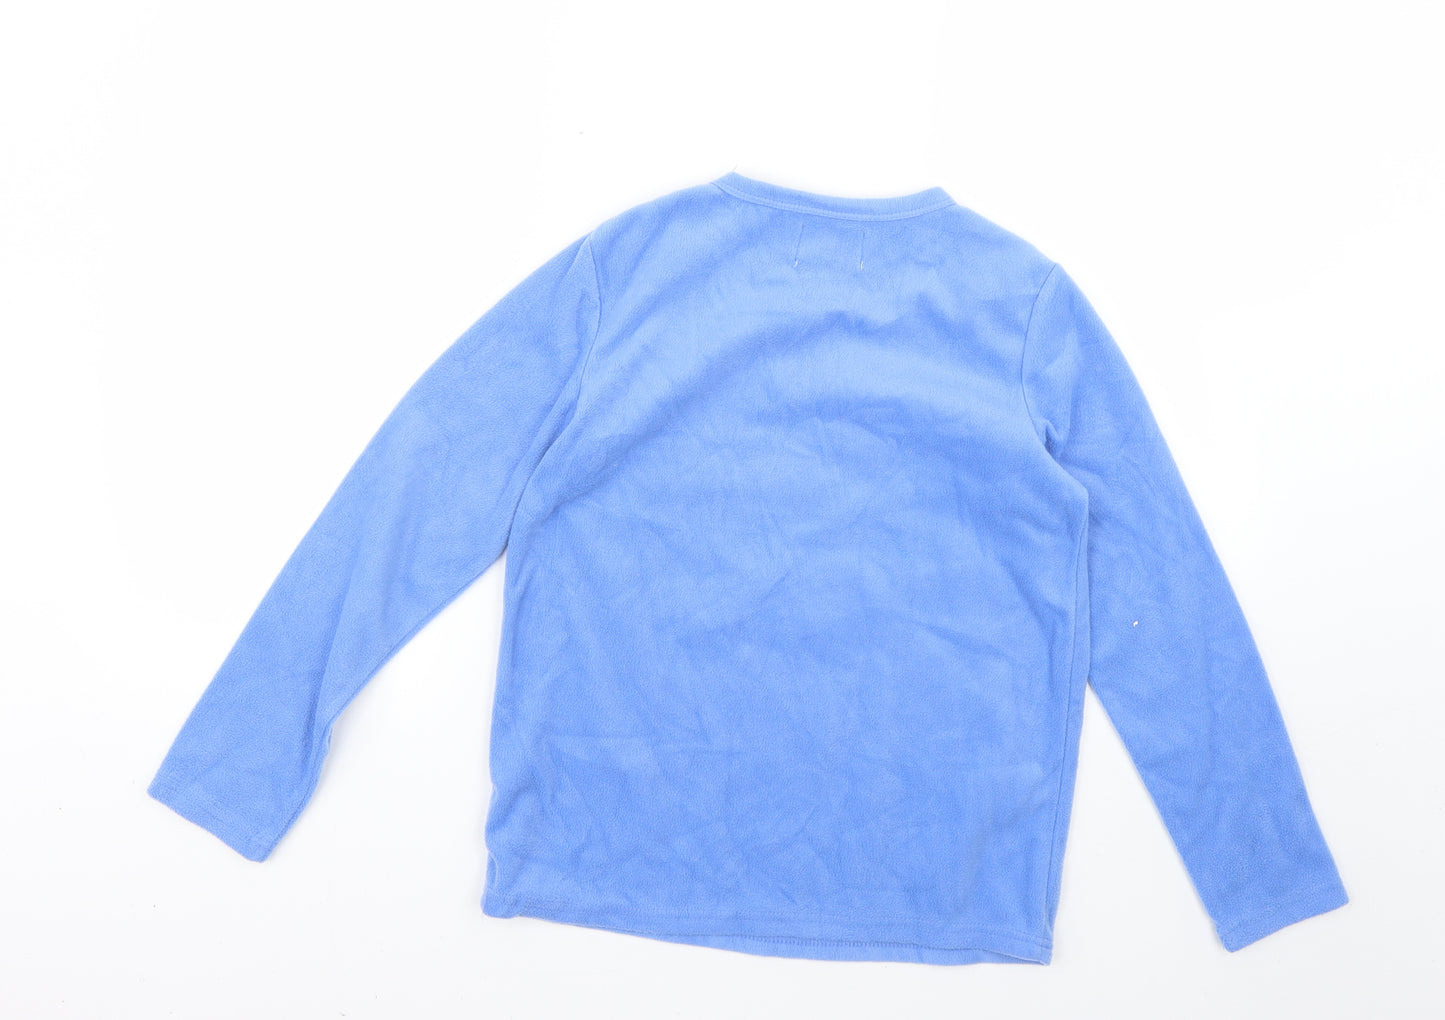 Pj collections Girls Blue Solid  Top Pyjama Top Size 11-12 Years